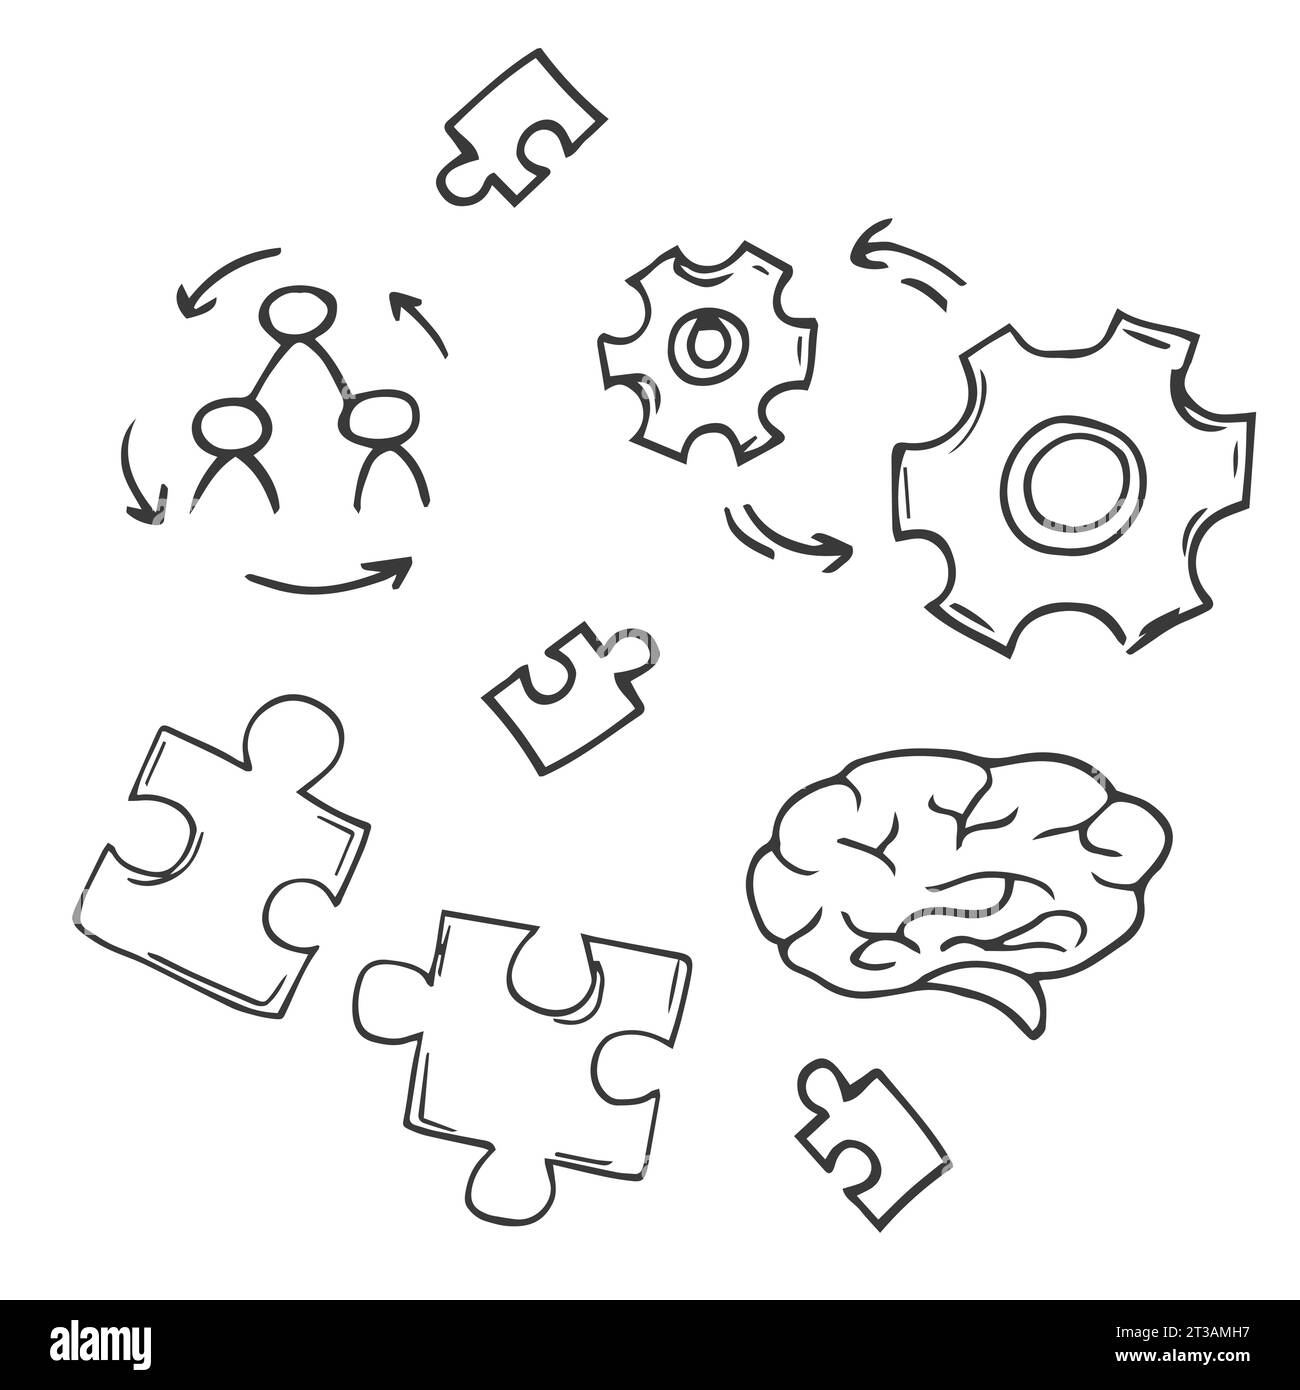 hand drawn Simple Set of Team Work Related Vector Line Icons. Contains such Icons as Cooperation, Collaboration, Team Meeting.doodle Stock Vector